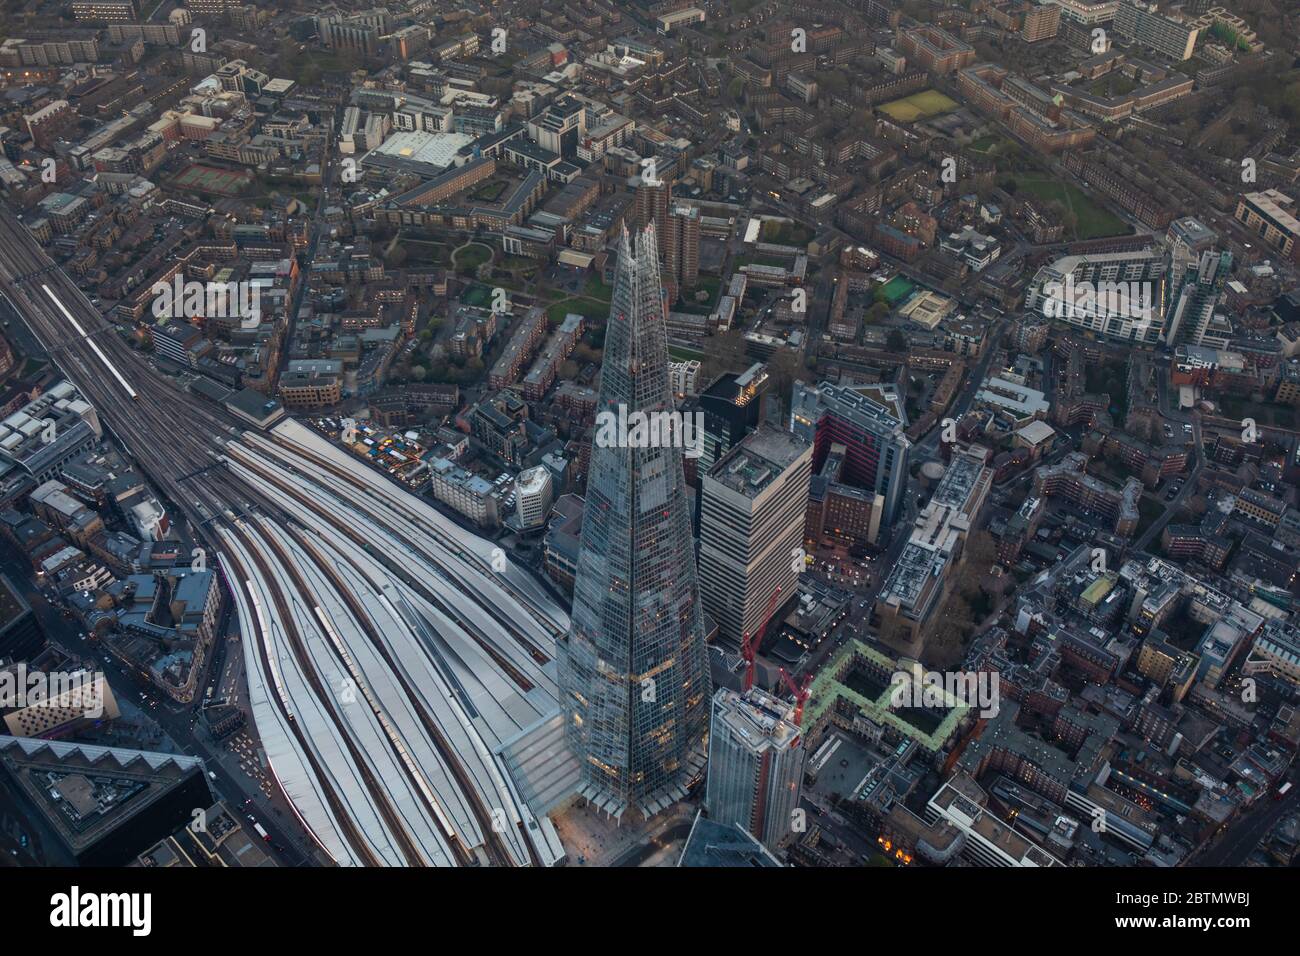 Aerial View of The Shard, London at Dusk Stock Photo